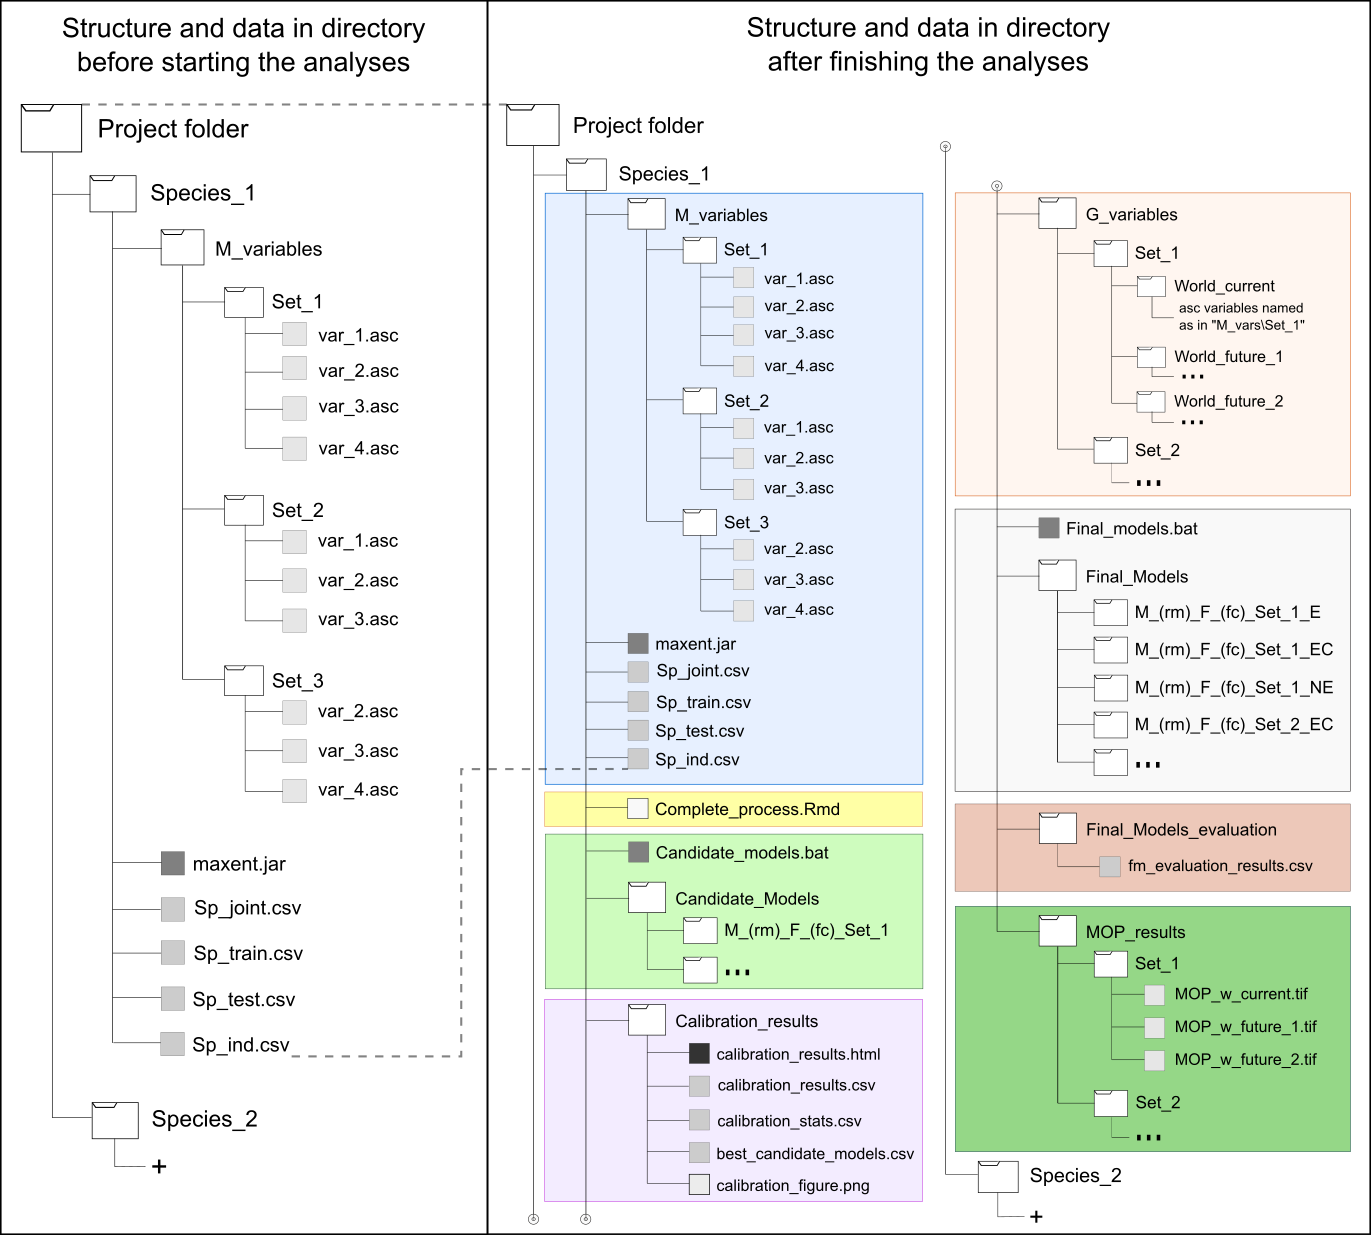 Figure 1. Directory structure and data for starting processing, as well as directory structure when the processes finish using the kuenm R package. Background colors represent data necessary before starting the analyses (blue) and data generated after the following steps: running the start function (yellow), creating candidate models (lighter green), evaluating candidate models (purple), preparing projection layers (light orange), generating final models and its projections (light gray), evaluating final models with independent data (brown), and analyzing extrapolation risks in projection areas or scenarios (darker green).